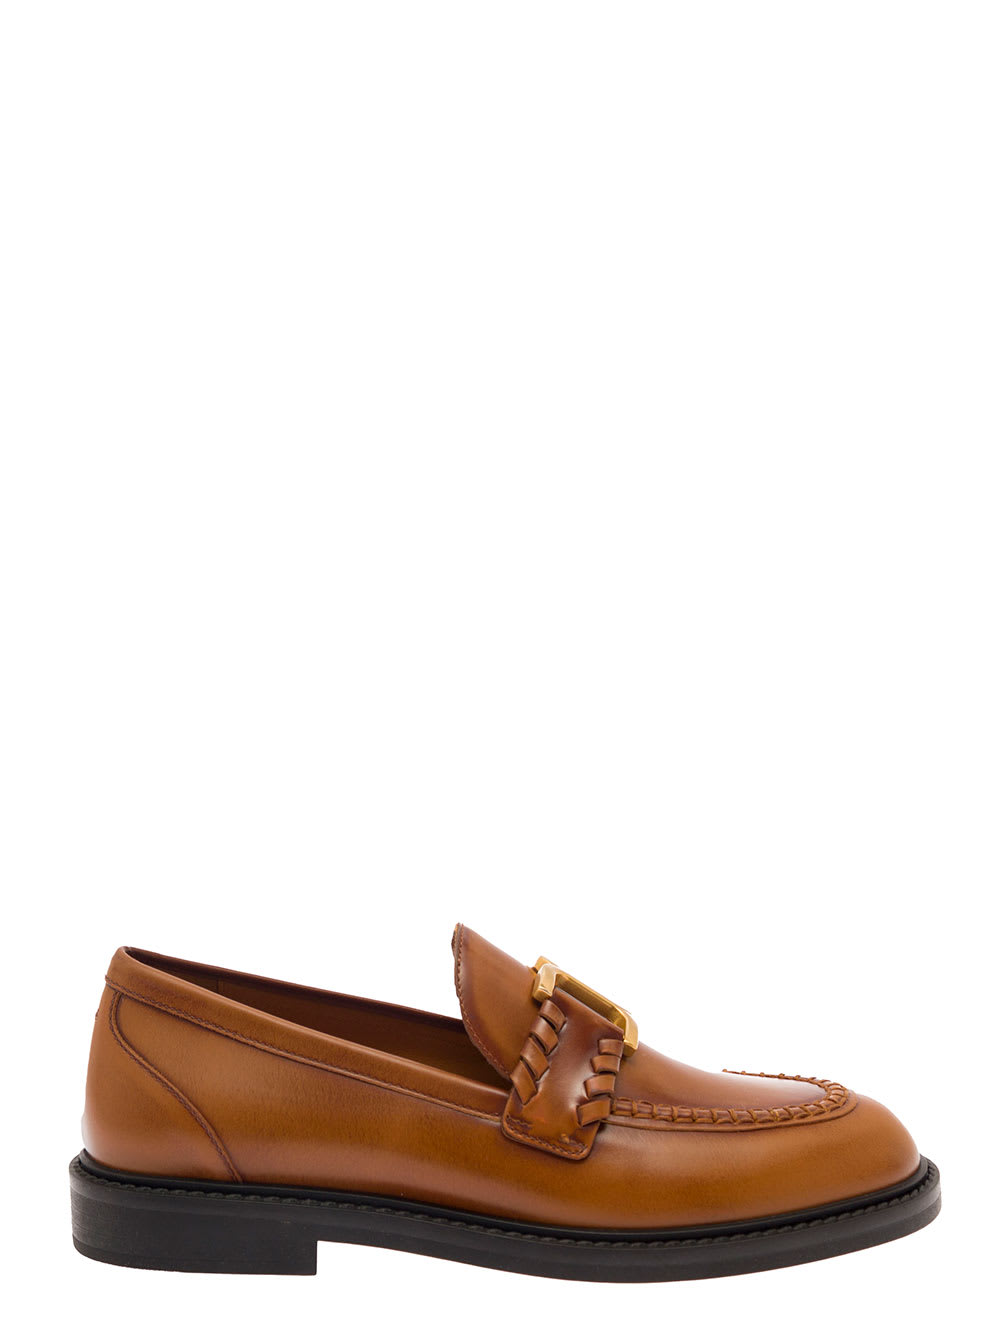 CHLOÉ MARCIE BROWN LOAFERS WITH GOLD-COLORED METAL LOGO IN SMOOTH LEATHER WOMAN